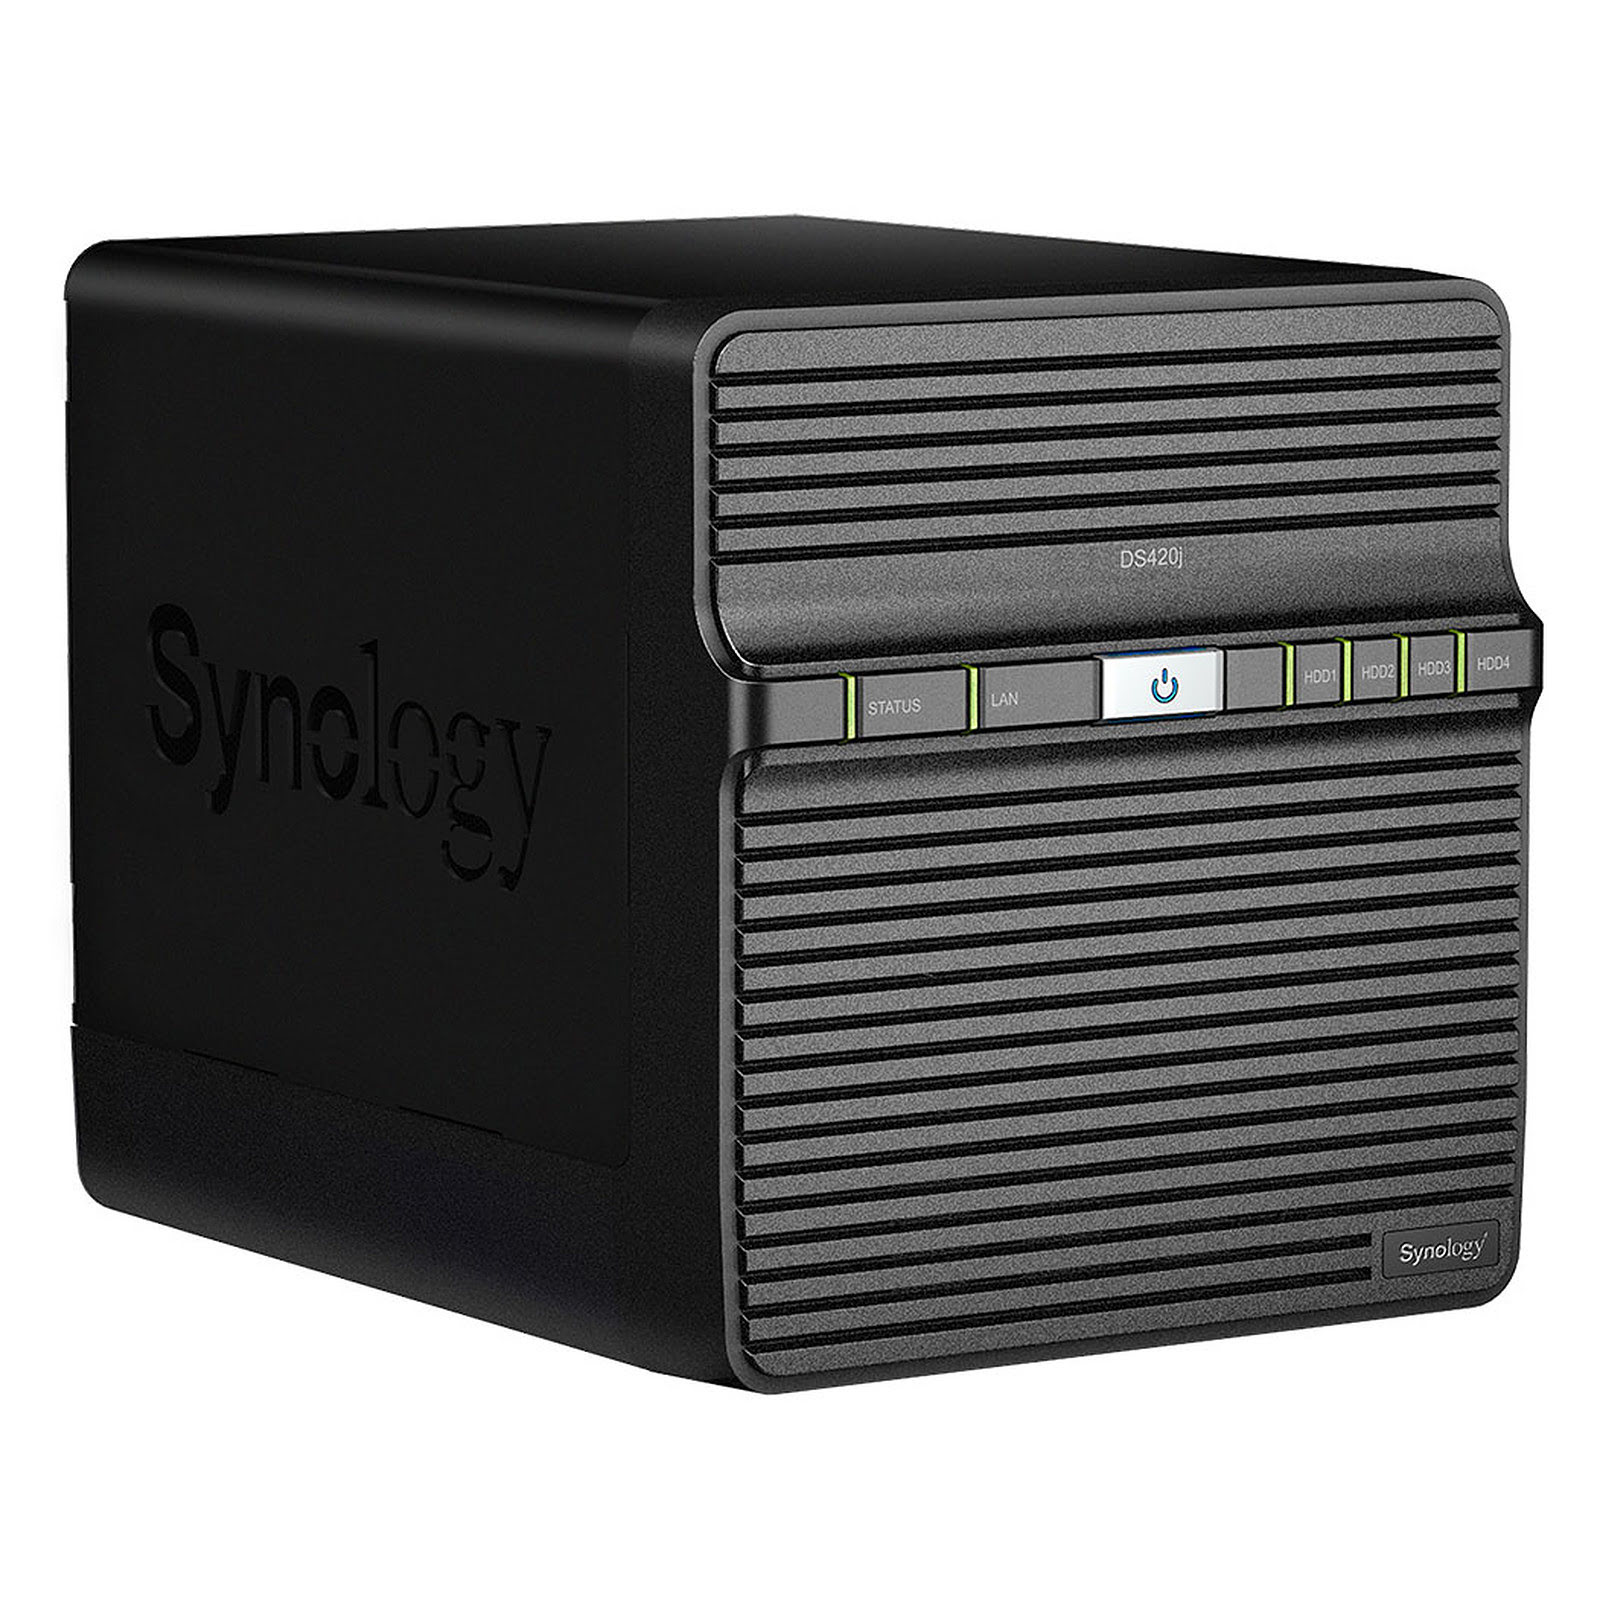 Serveur NAS Synology DS420J - 4 HDD